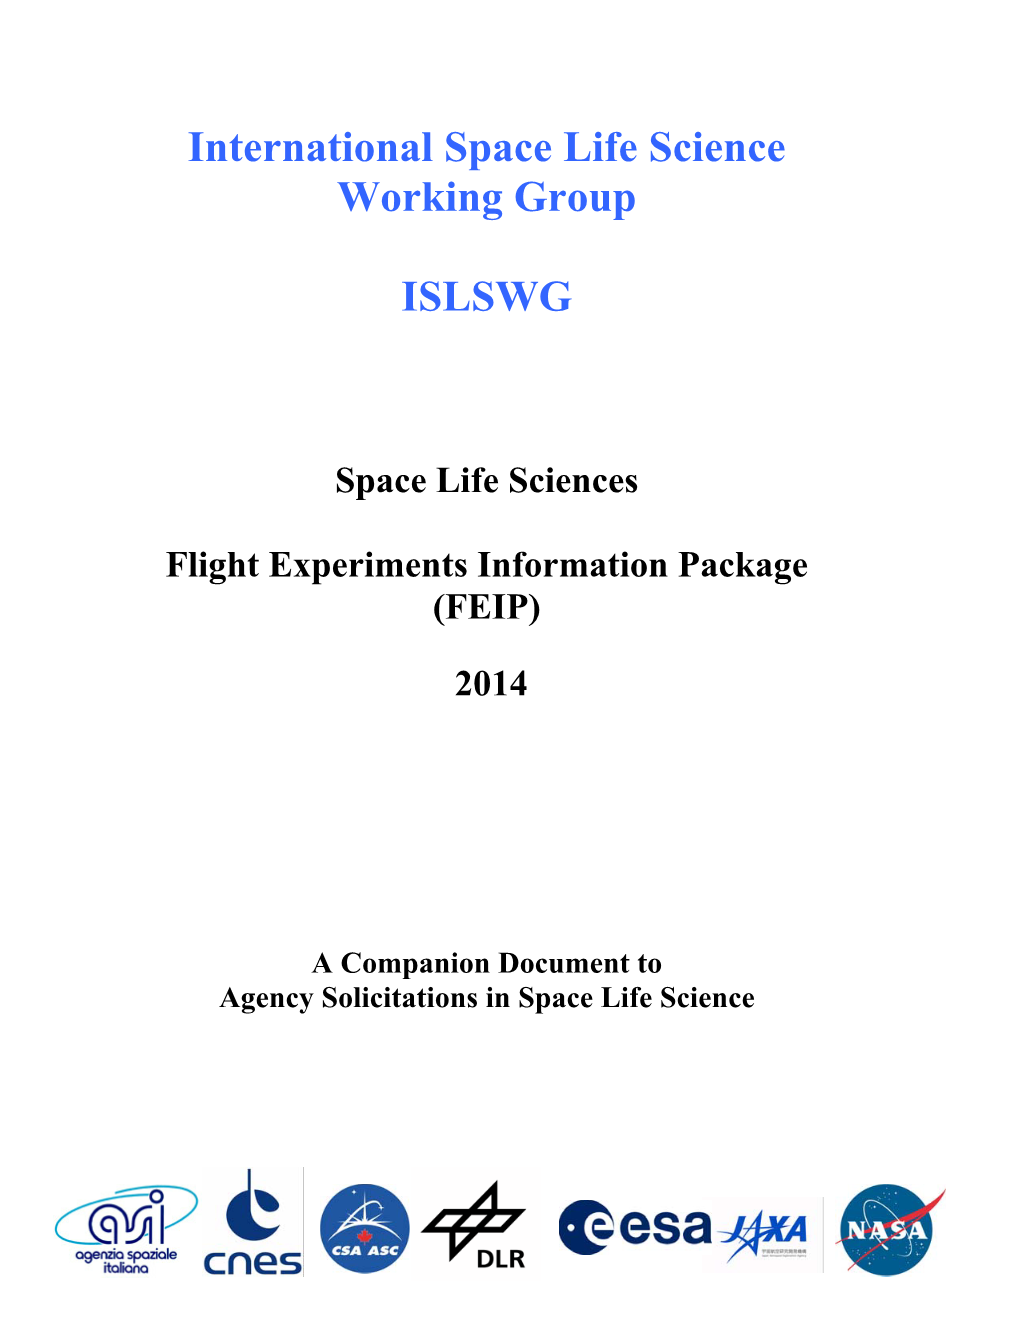 Space Life Sciences Flight Experiments Information Package